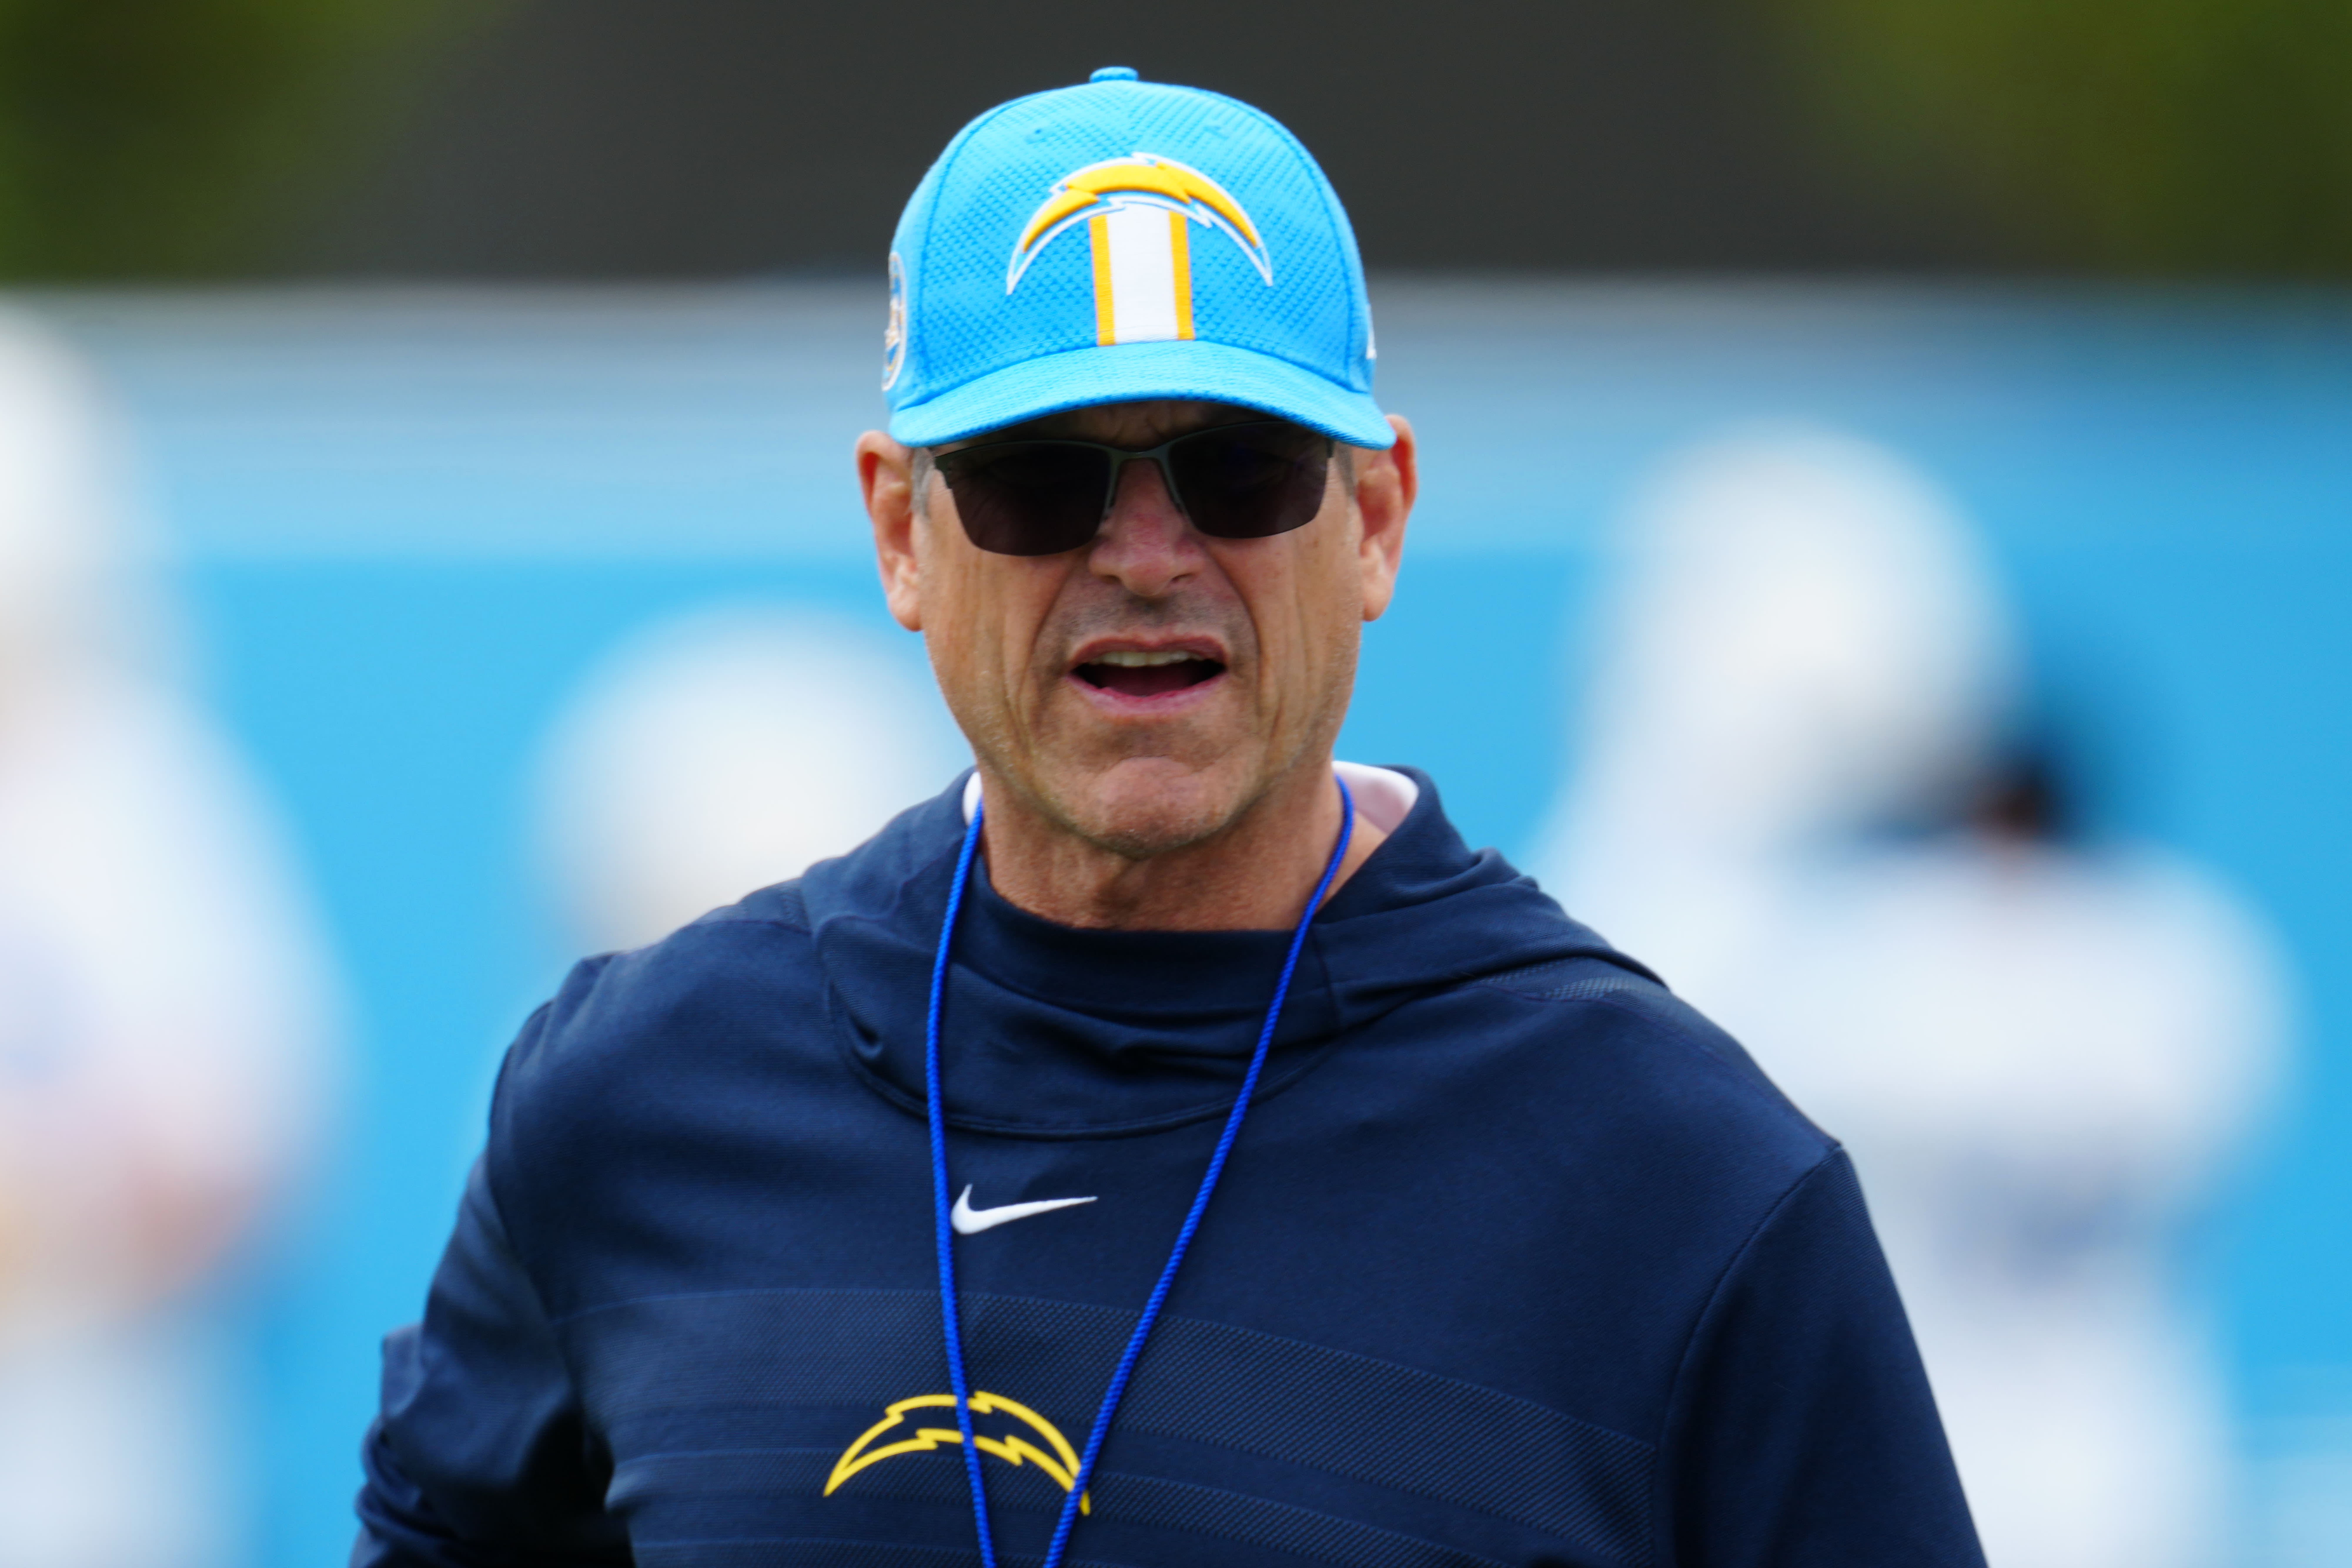 Denzel Perryman on Jim Harbaugh: ‘He reminds me of Will Ferrell’